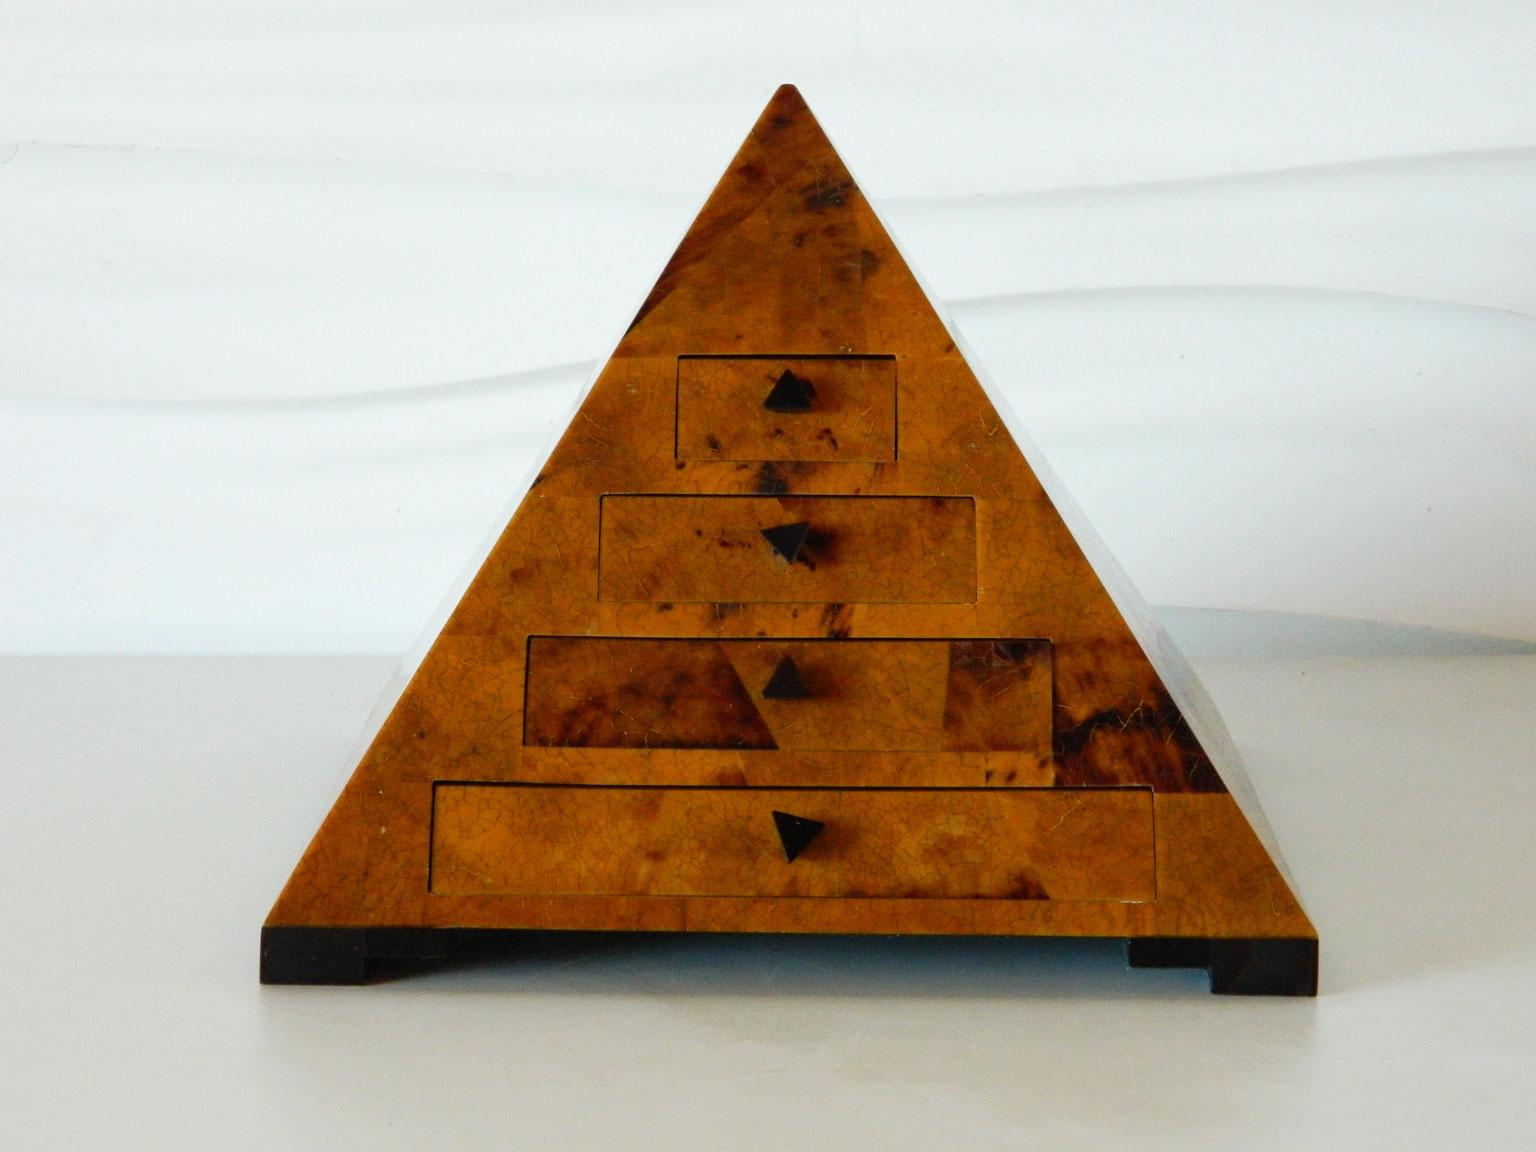 This pyramid-shaped decorative box in the style of Maitland Smith is made of burled wood that has been lacquered and sits upon a black base. It features four stair-stepped drawers lined with velvet and with triangular pulls.